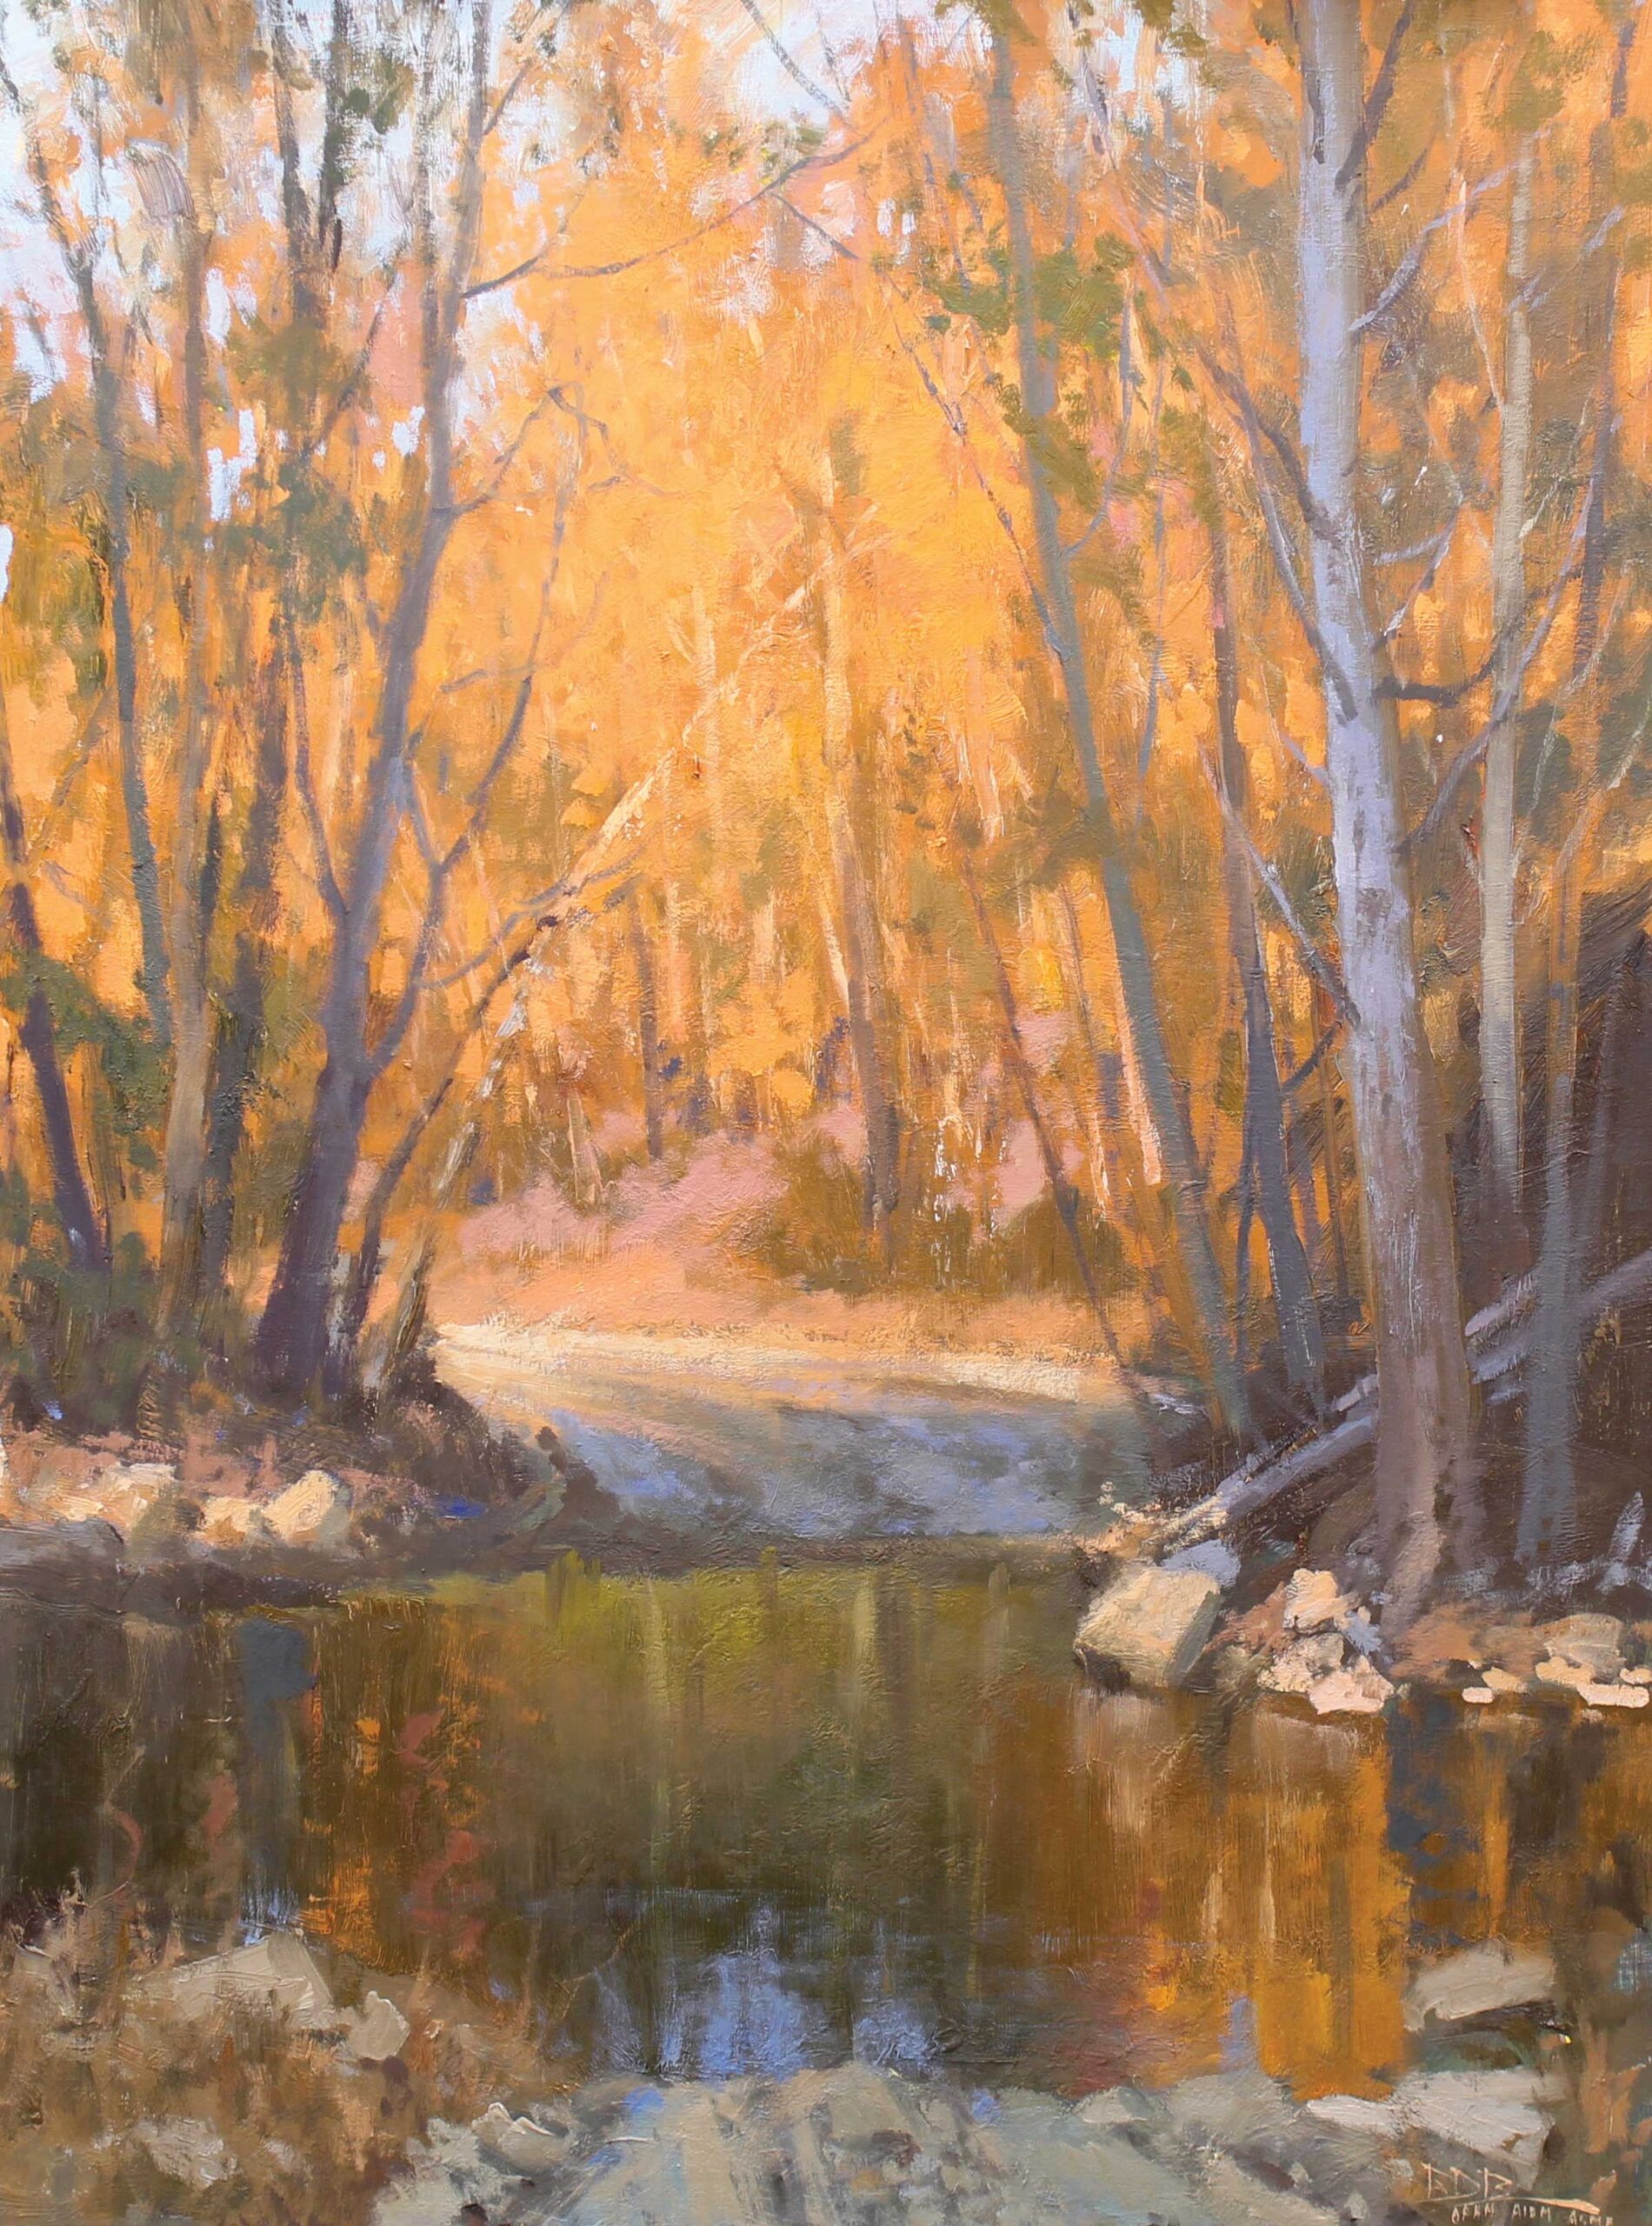 Roger Dale Brown, "Across the Ford II," 2020, oil on linen, 40 x 30 in., private collection